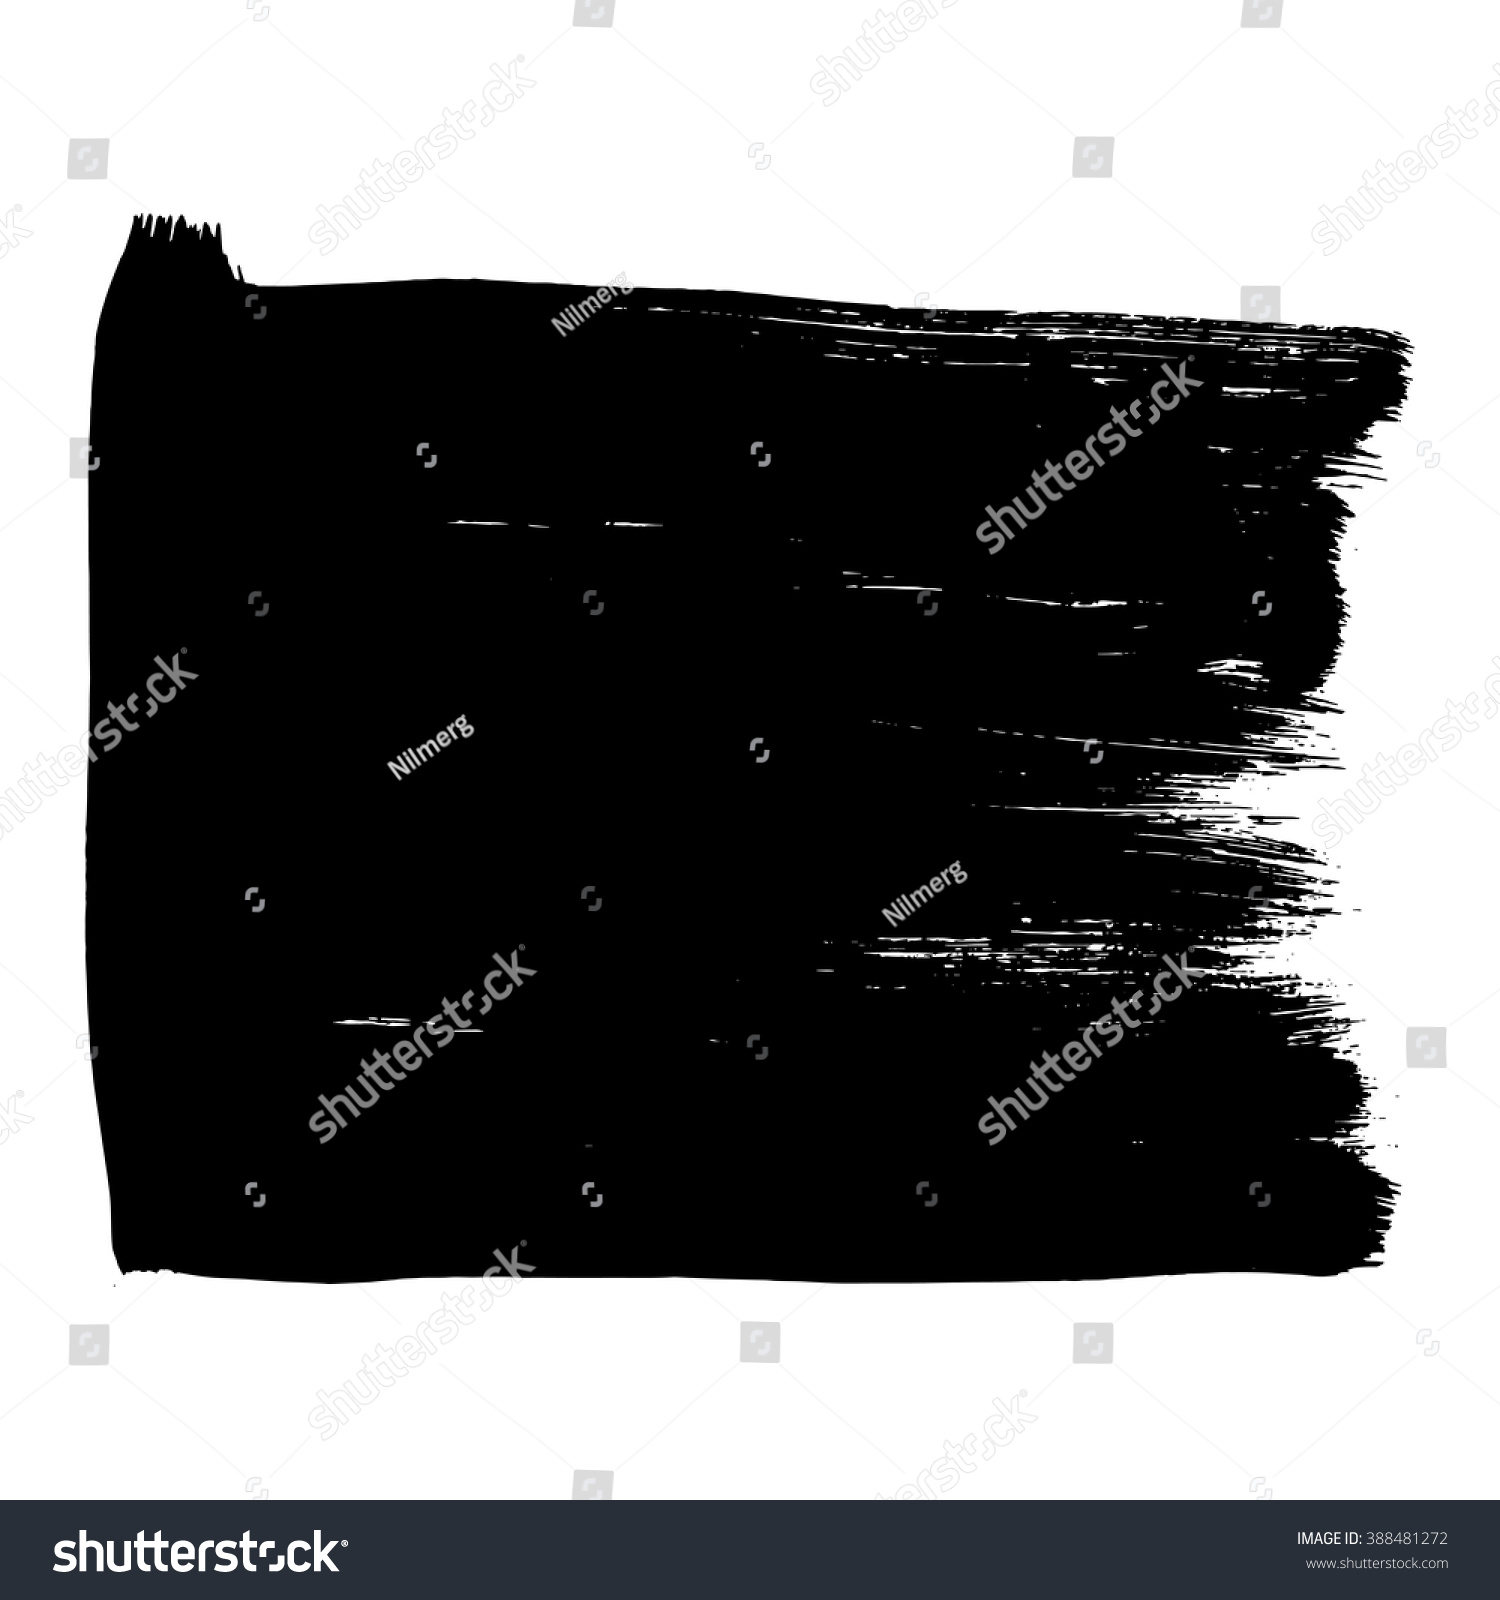 Grunge Black Abstract Textured Square Vector Stock Vector 388481272 ...